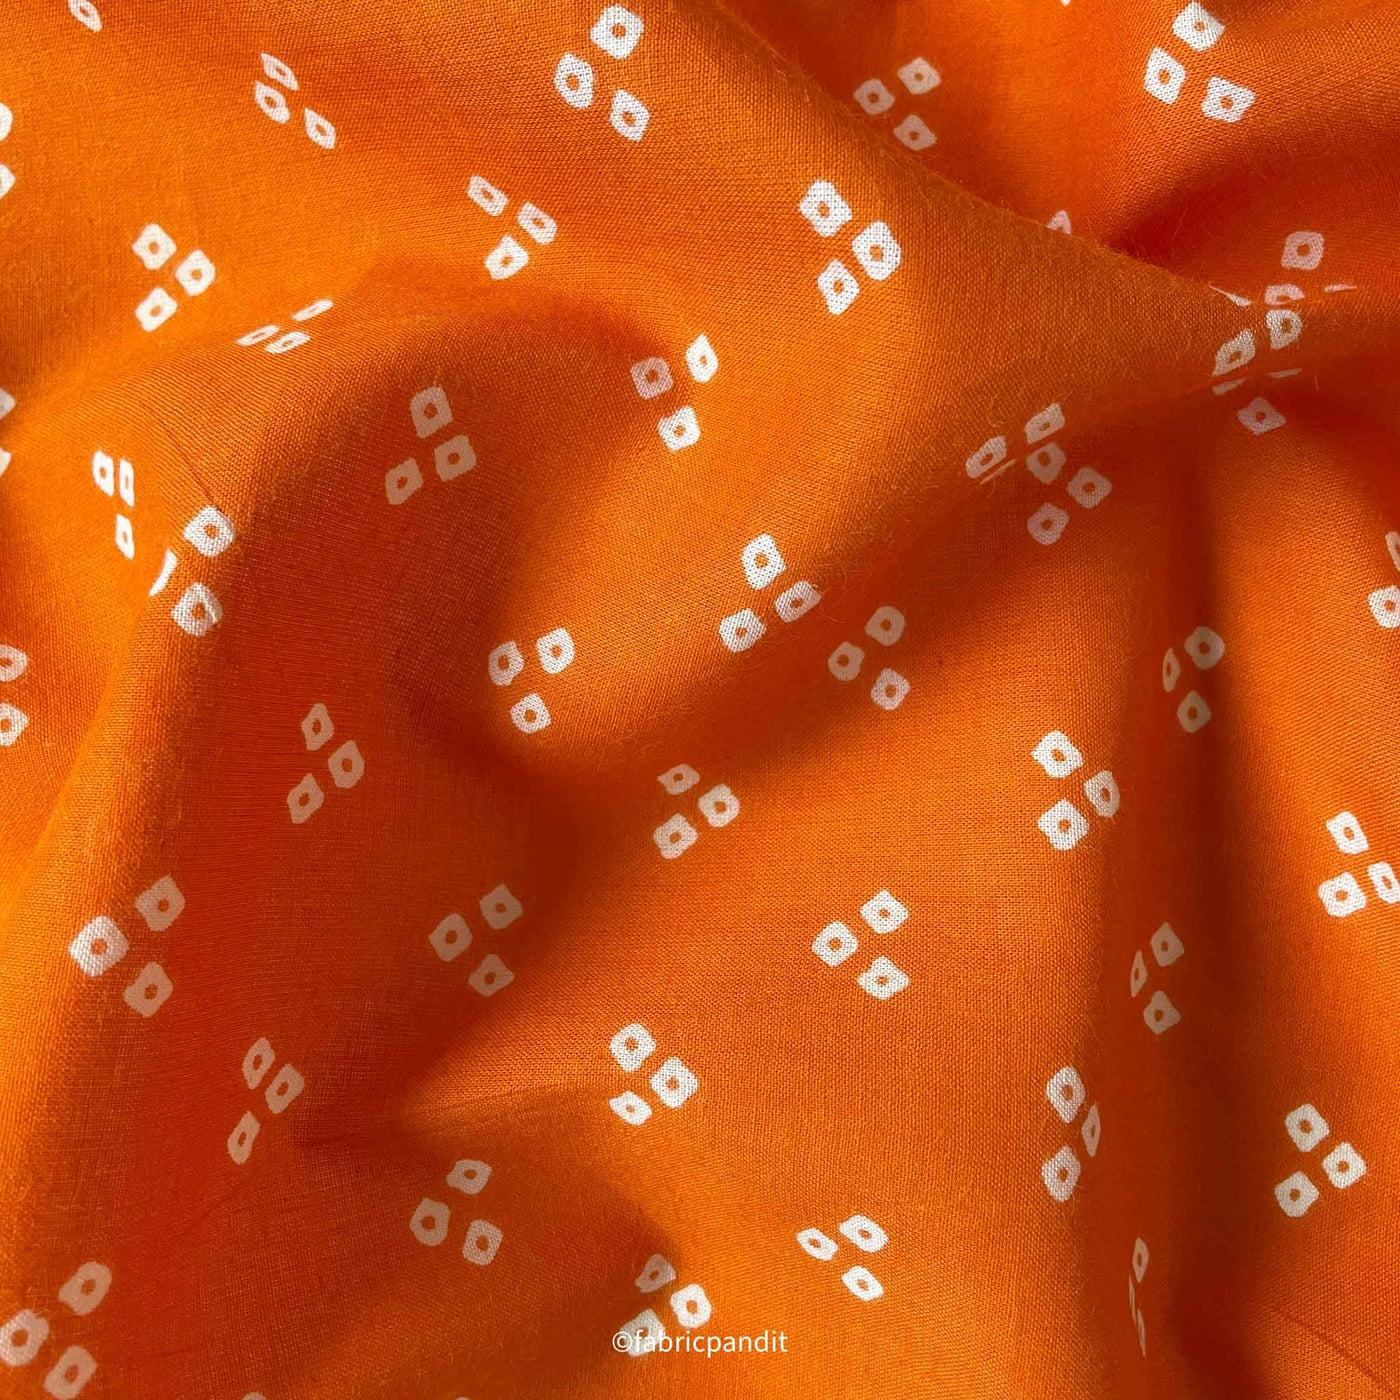 Fabric Pandit Fabric Orange and White Triple Dots Bandhani Pattern Hand Block Printed Pure Cotton Fabric (Width 42 Inches)